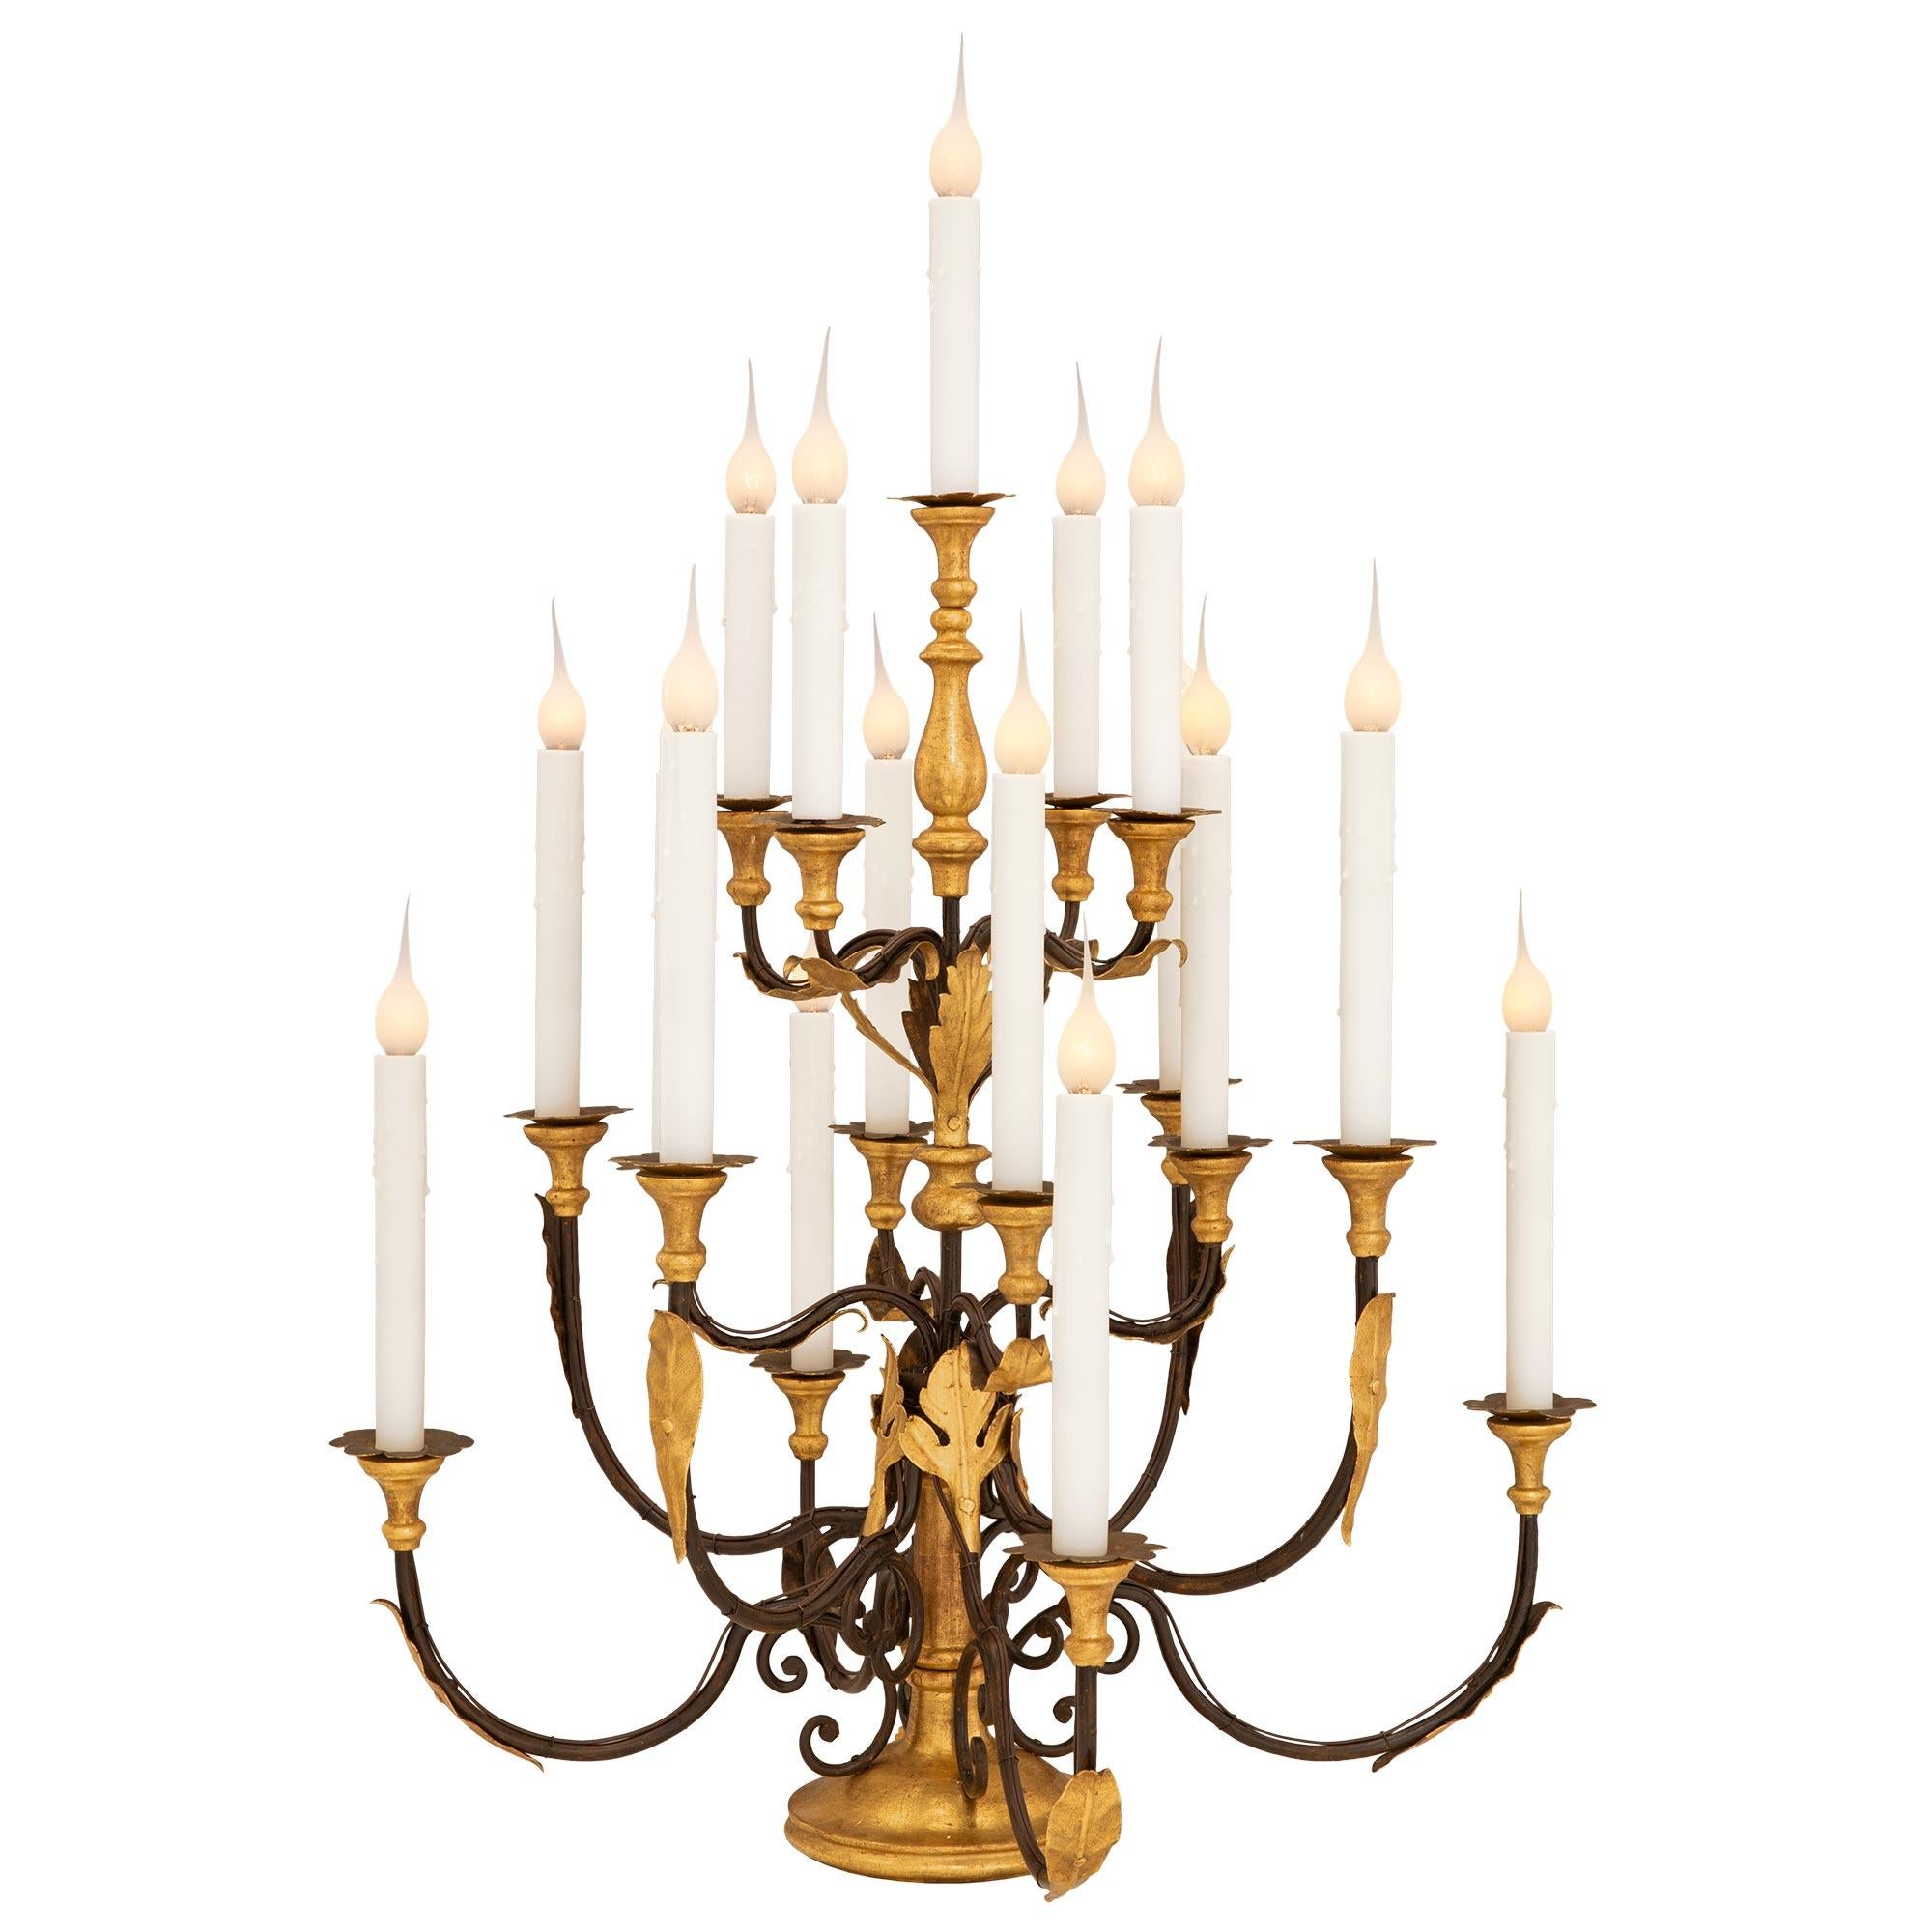 Gilt Pair of Italian 18th Century Baroque St. Wrought Iron Candelabra Lamps For Sale